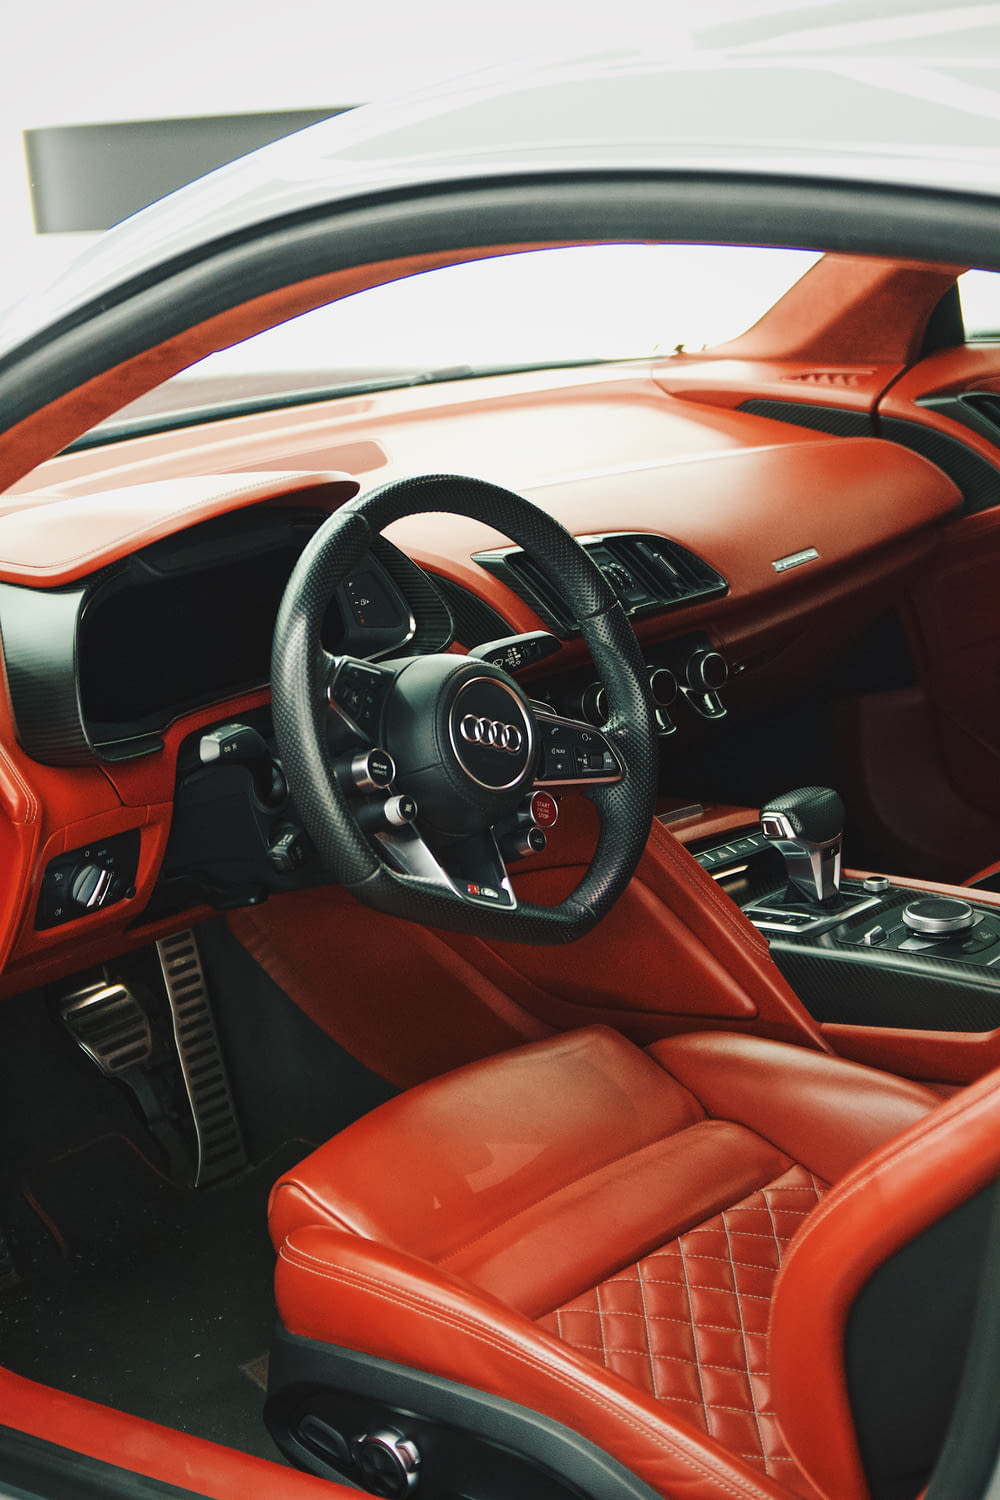 the interior of an orange and black sports car